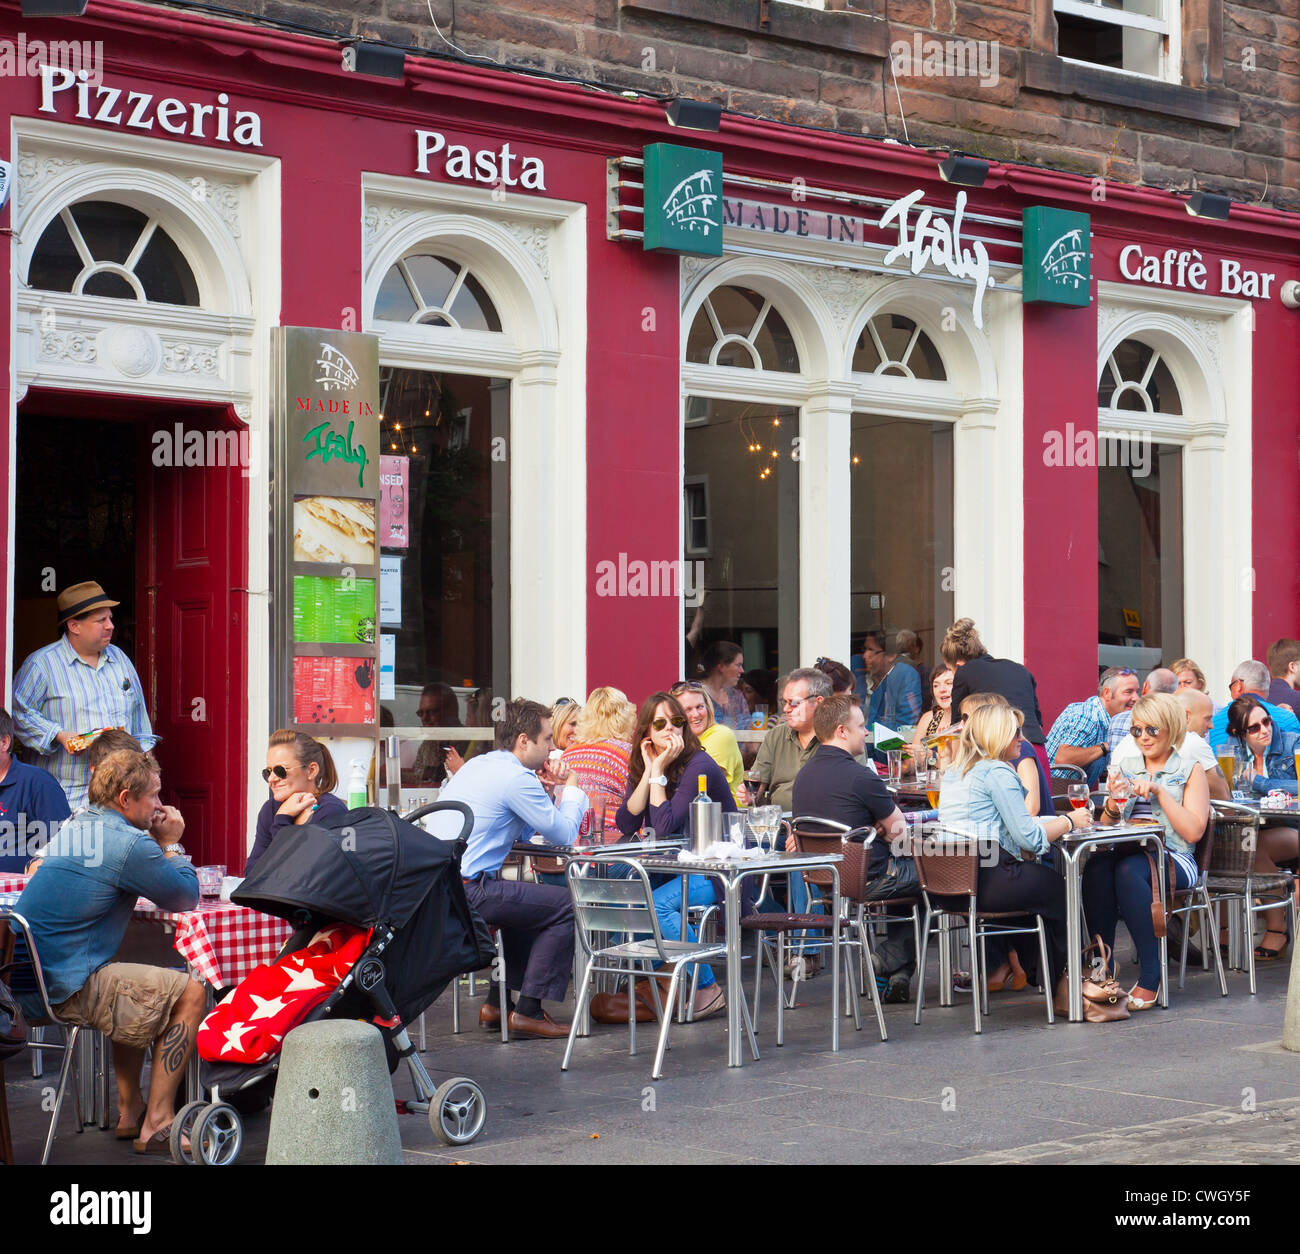 Patrons outside Made in Italy, a Pizzeria caffe bar restaurant in the Grassmarket area of Edinburgh's Old Town. Stock Photo